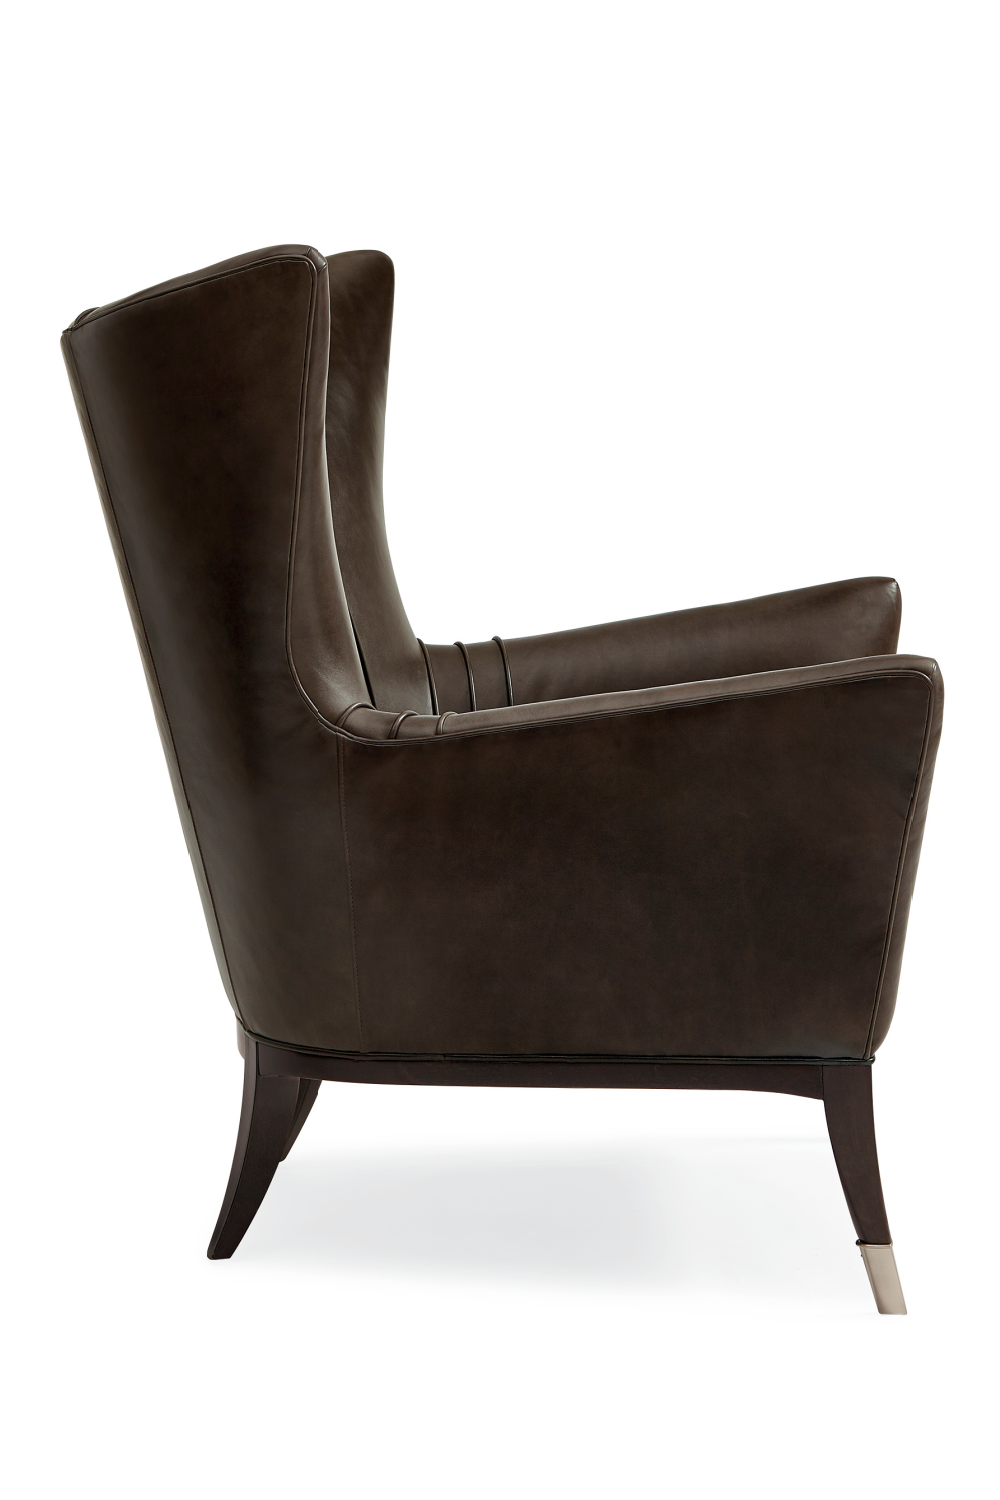 Brown Leather Wingback Chair | Caracole So Welt Done | Oroa.com